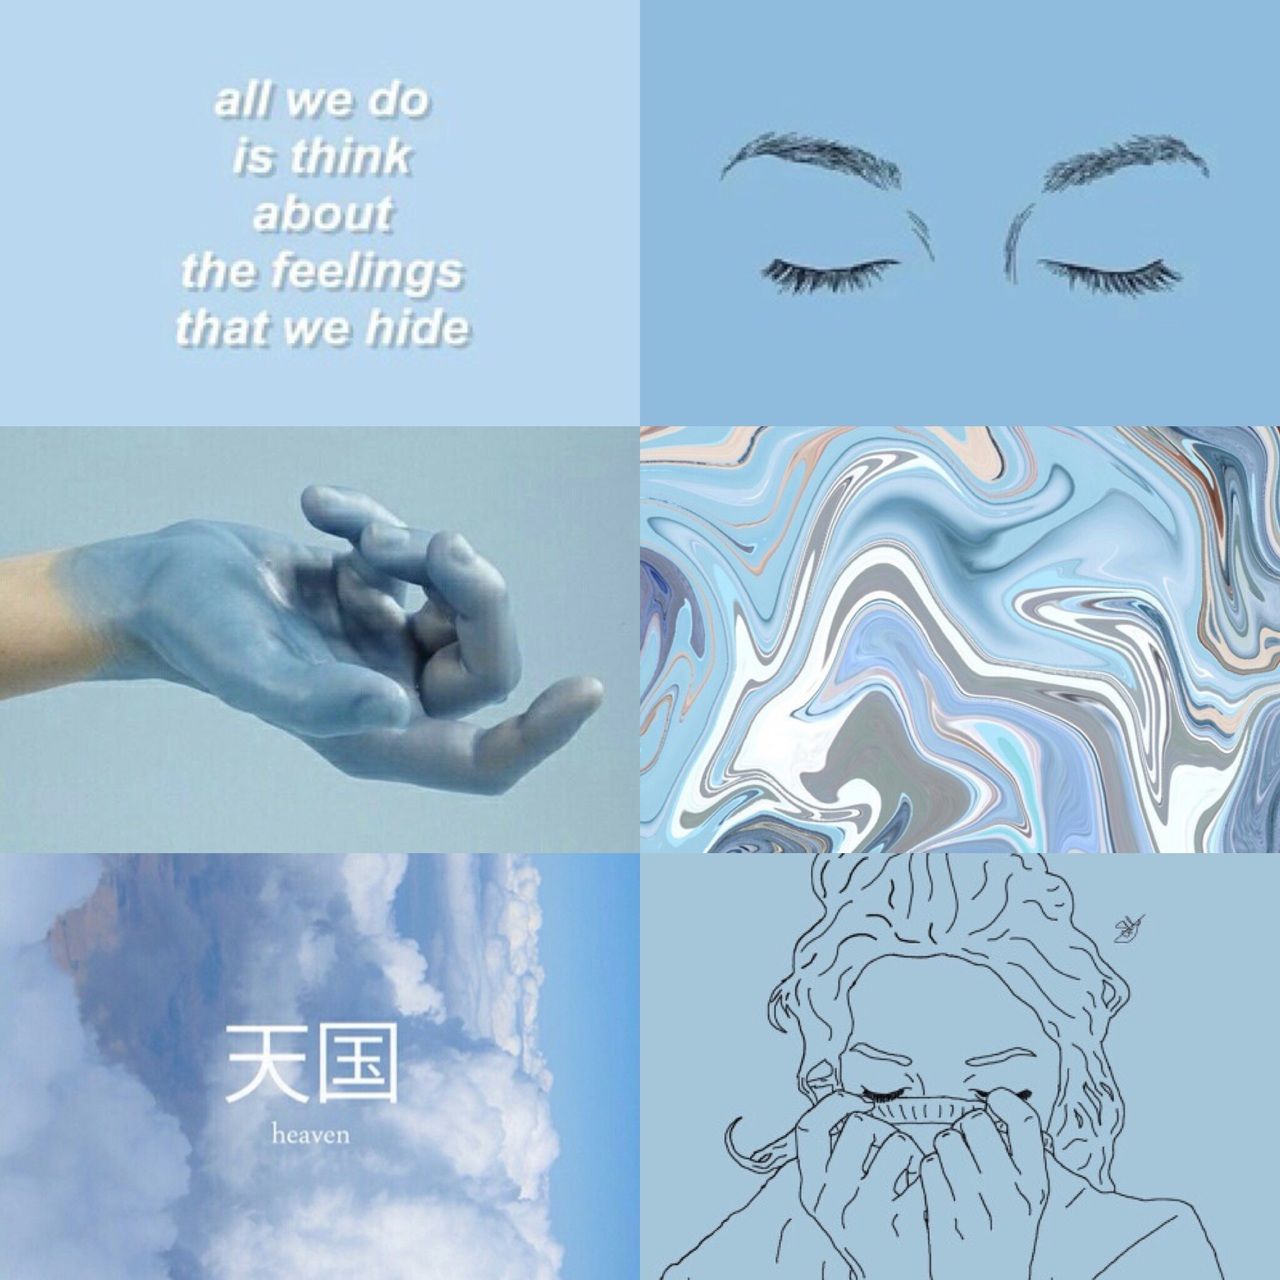 Aesthetic collage of blue hands, clouds, and the word 